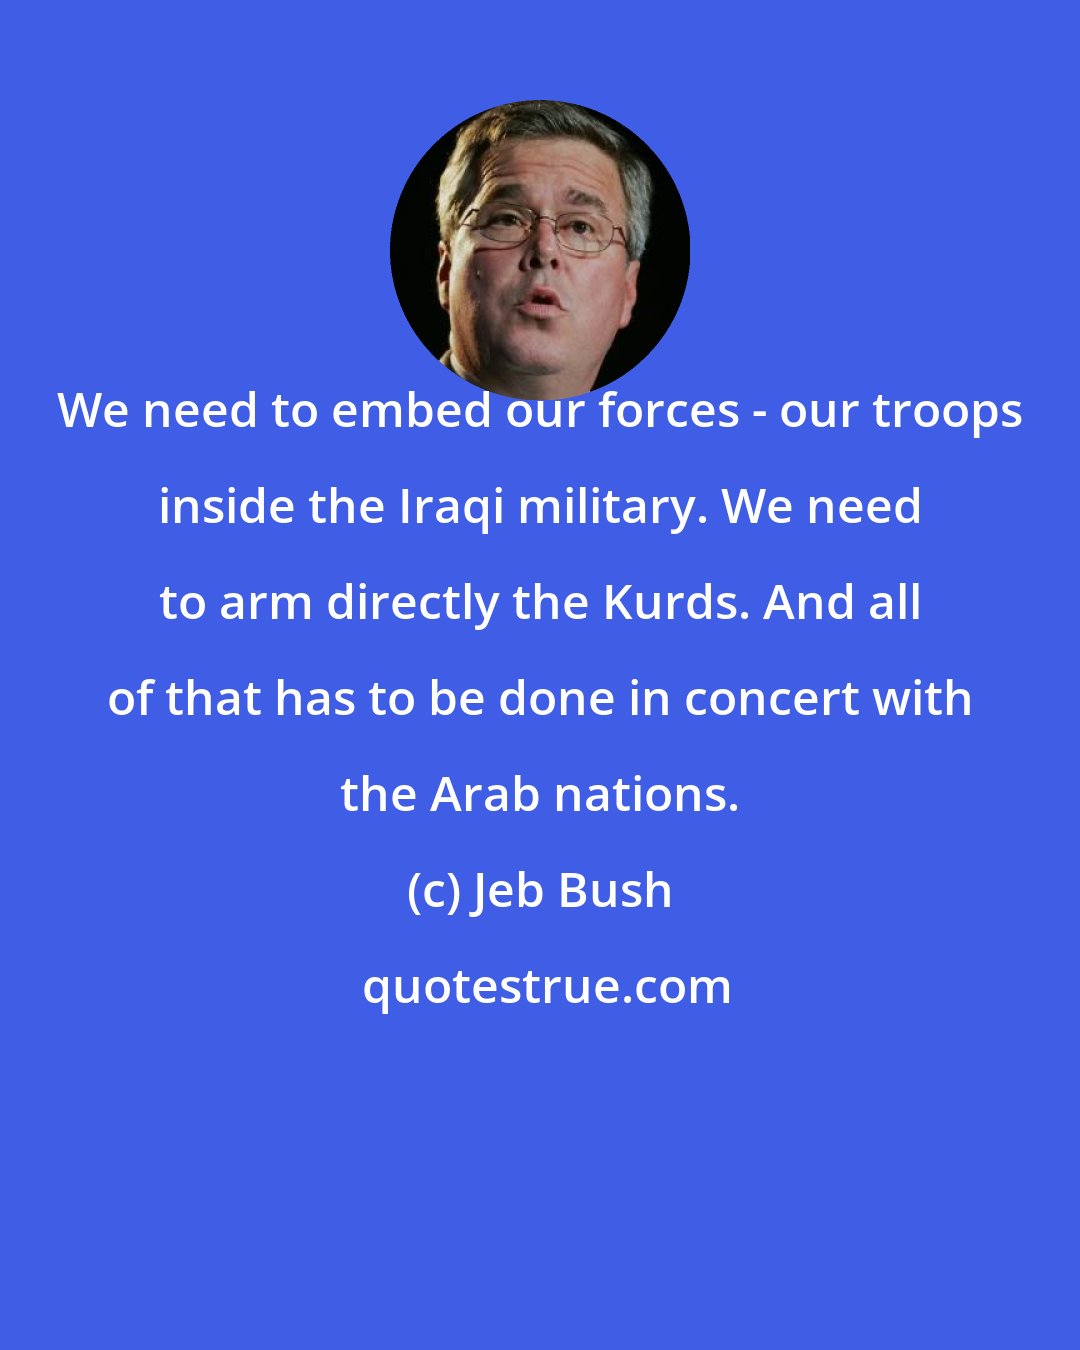 Jeb Bush: We need to embed our forces - our troops inside the Iraqi military. We need to arm directly the Kurds. And all of that has to be done in concert with the Arab nations.